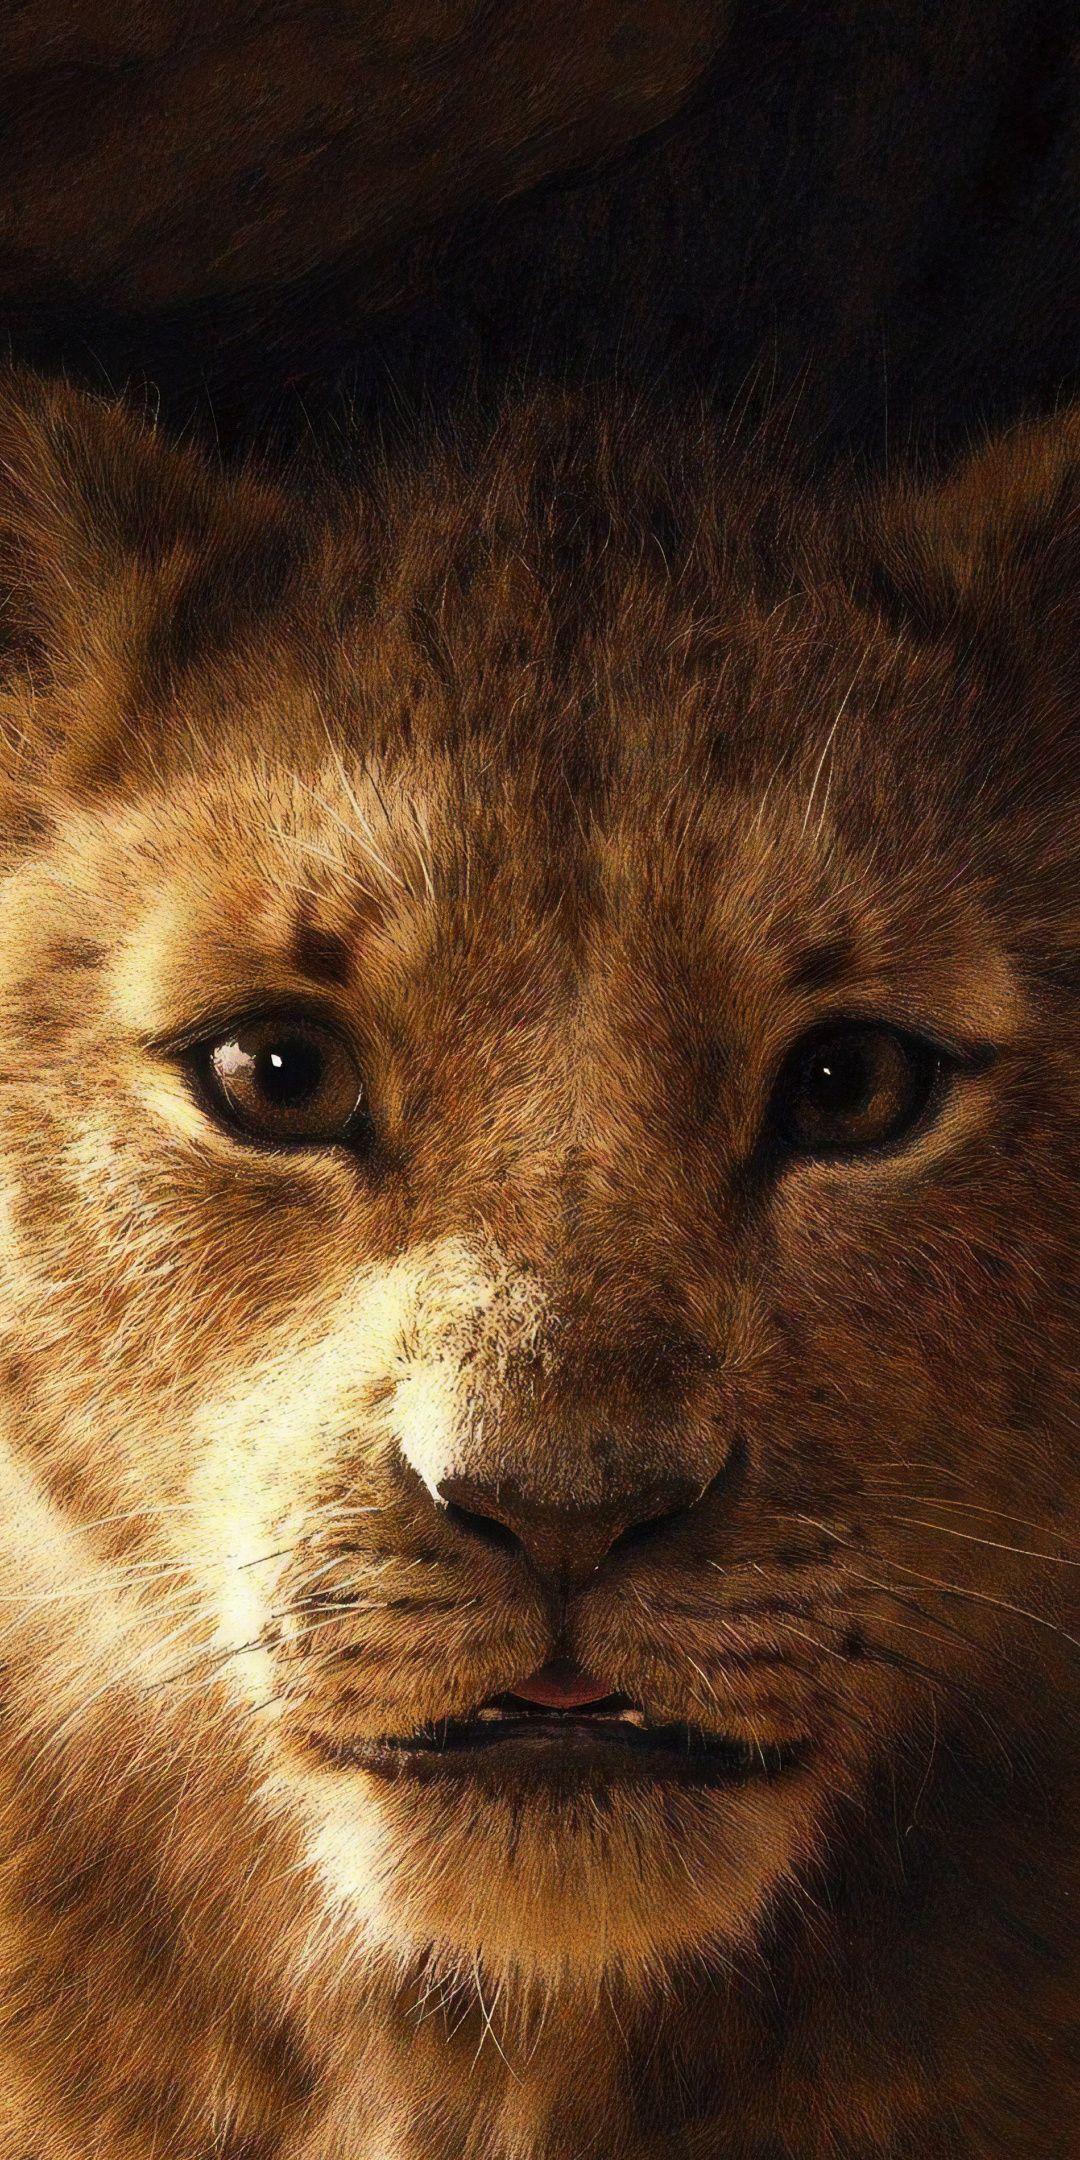 Simba, The Lion King, 2019 movie, 1080x2160 wallpaper. Absolutely